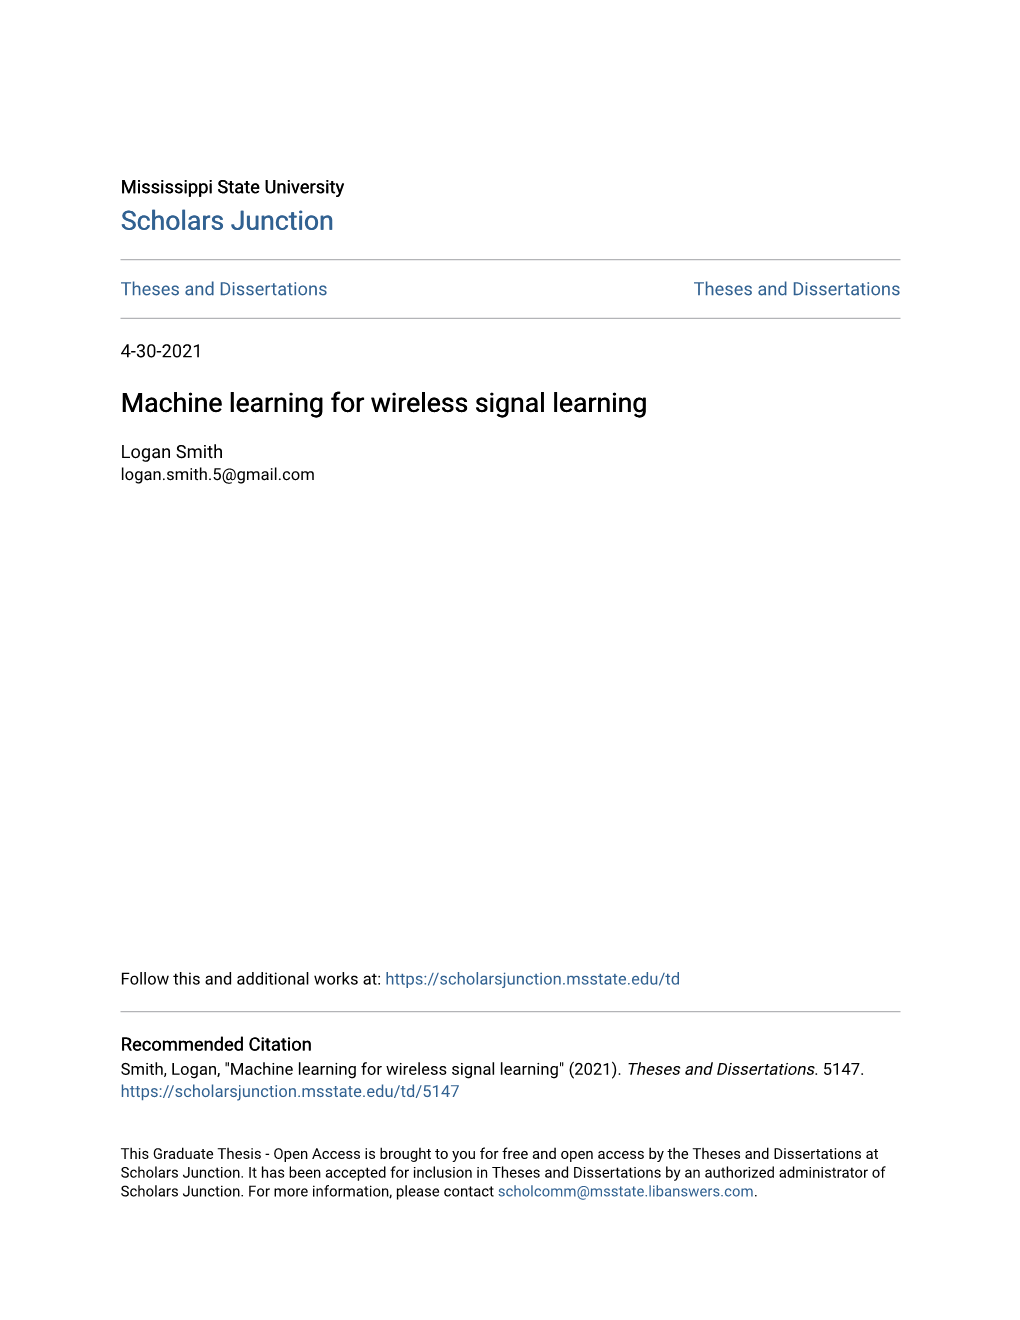 Machine Learning for Wireless Signal Learning